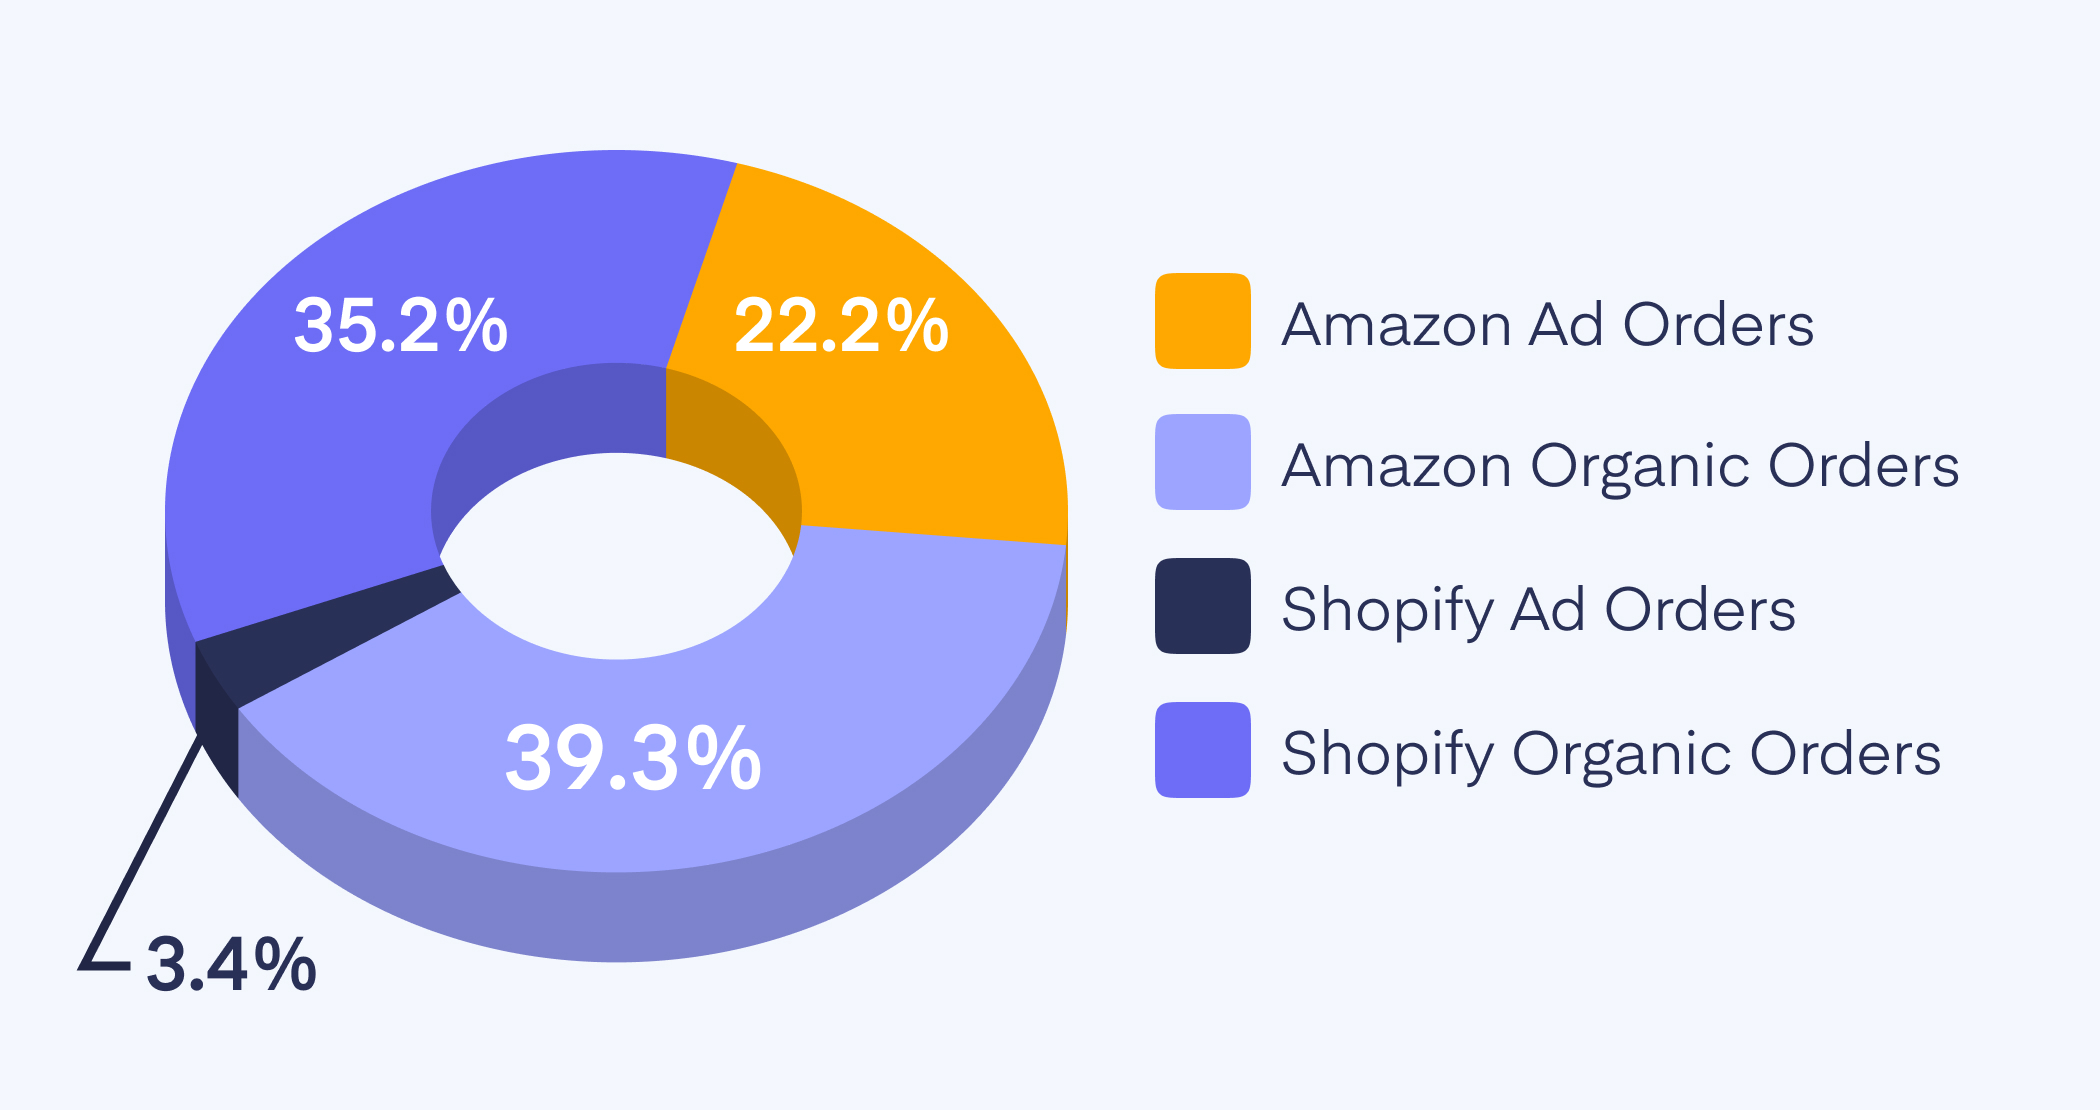 Ad and Organic Orders on Amazon vs. Ad and Organic Orders on Spotify